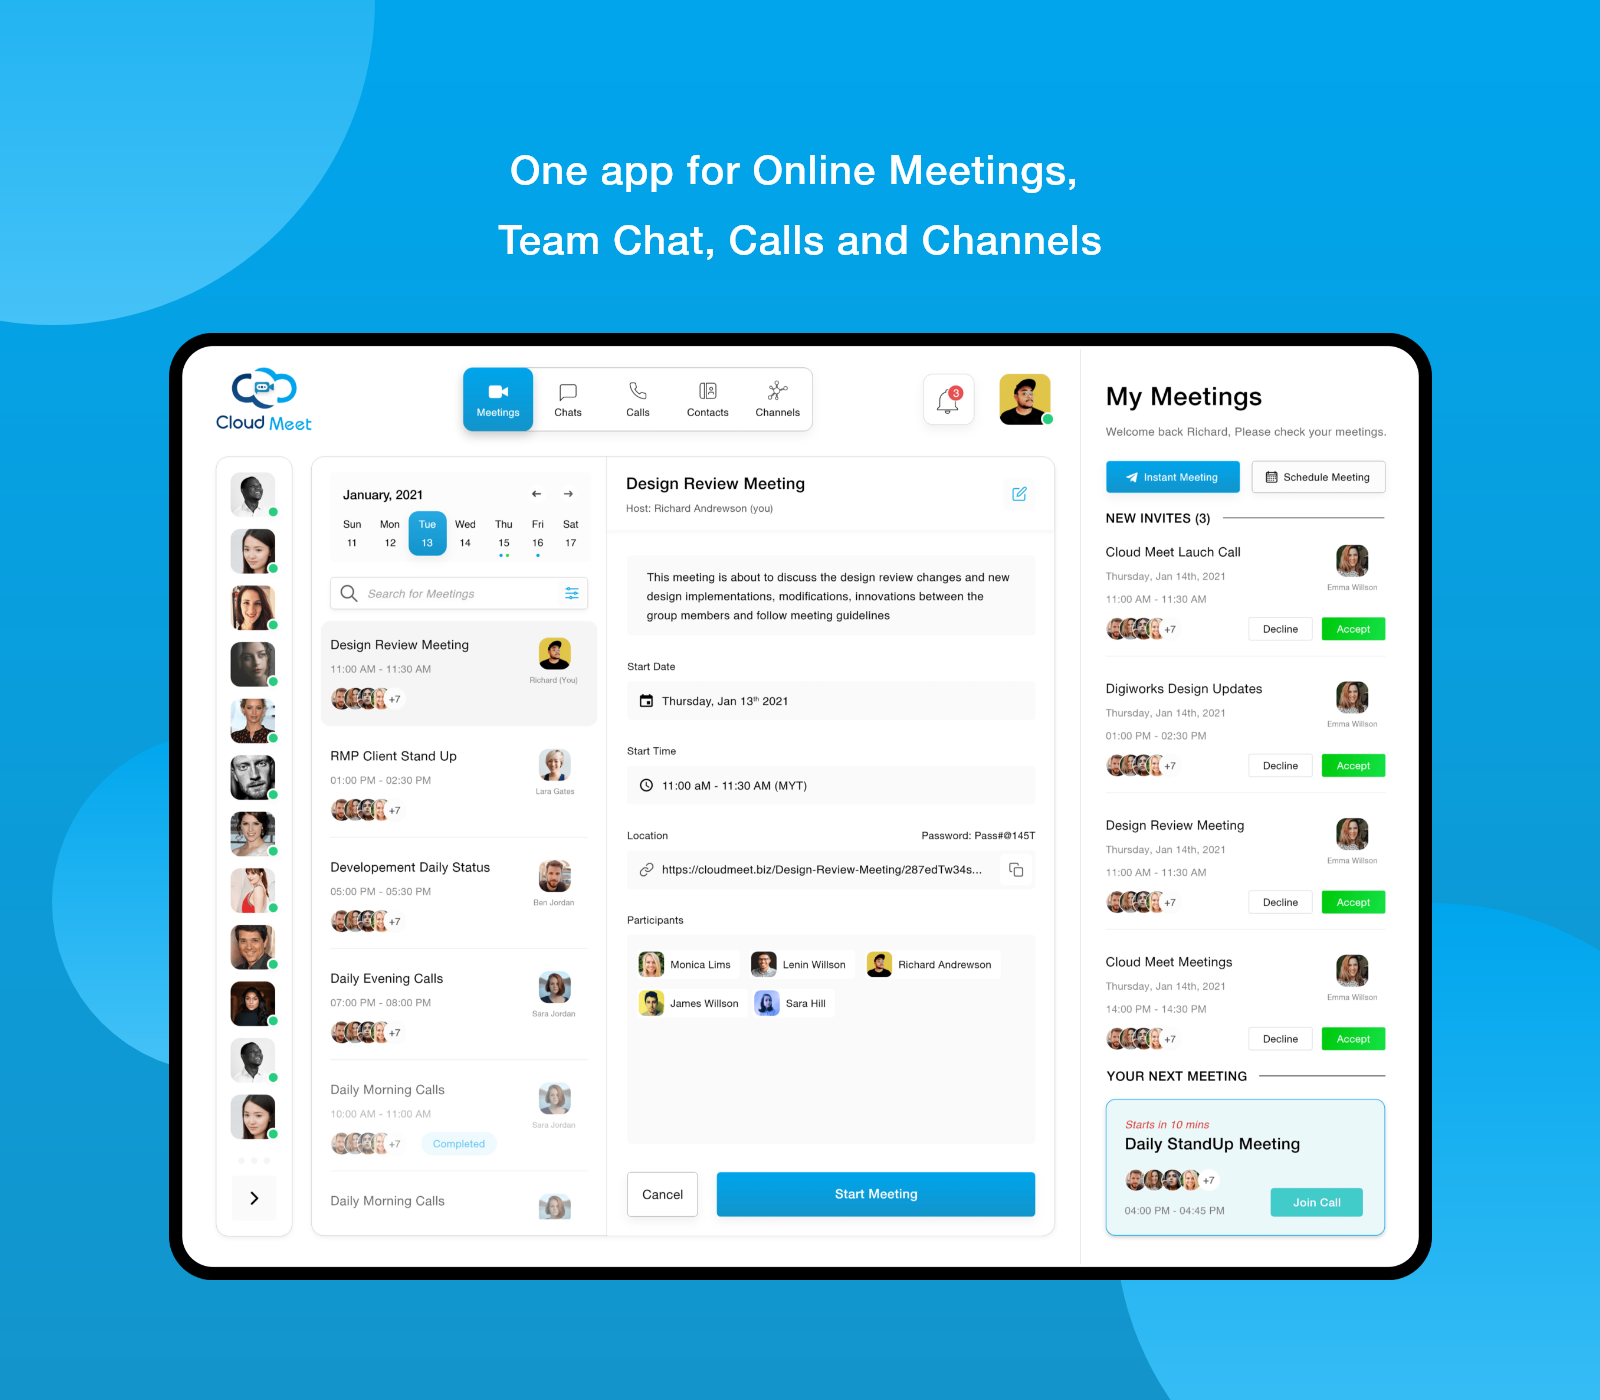 One app for online meetings and team chats, calls and channels.